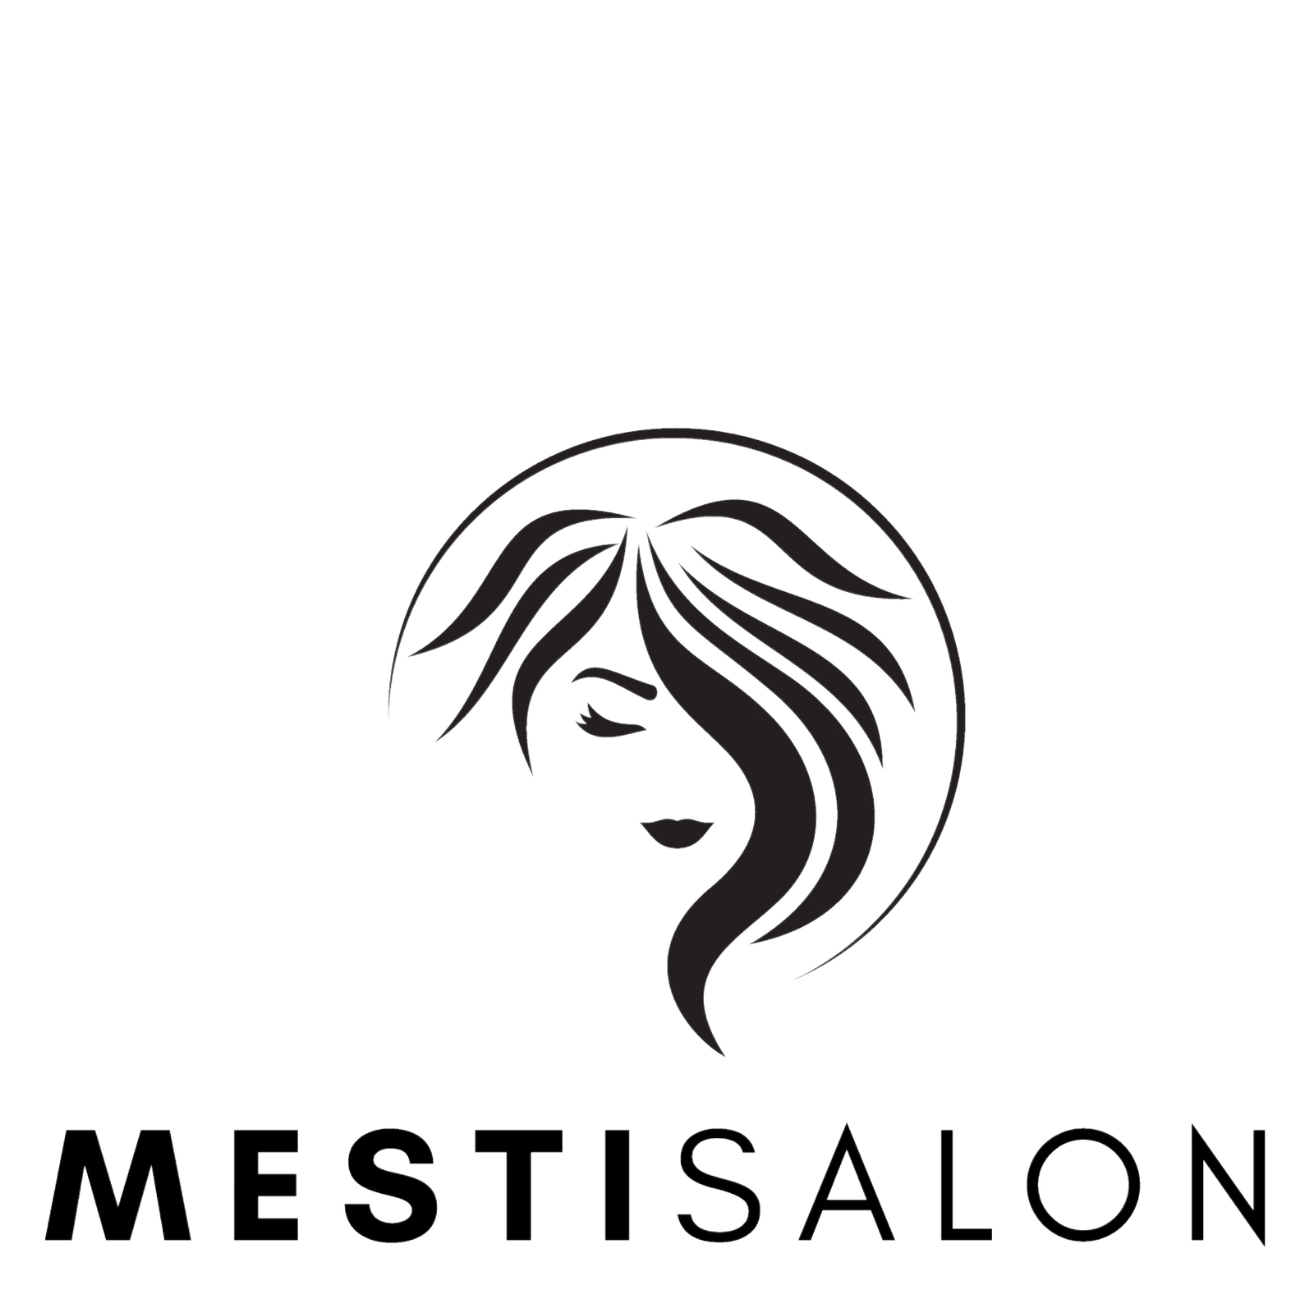 A logo for a hair salon with a woman 's face and hair in a circle.